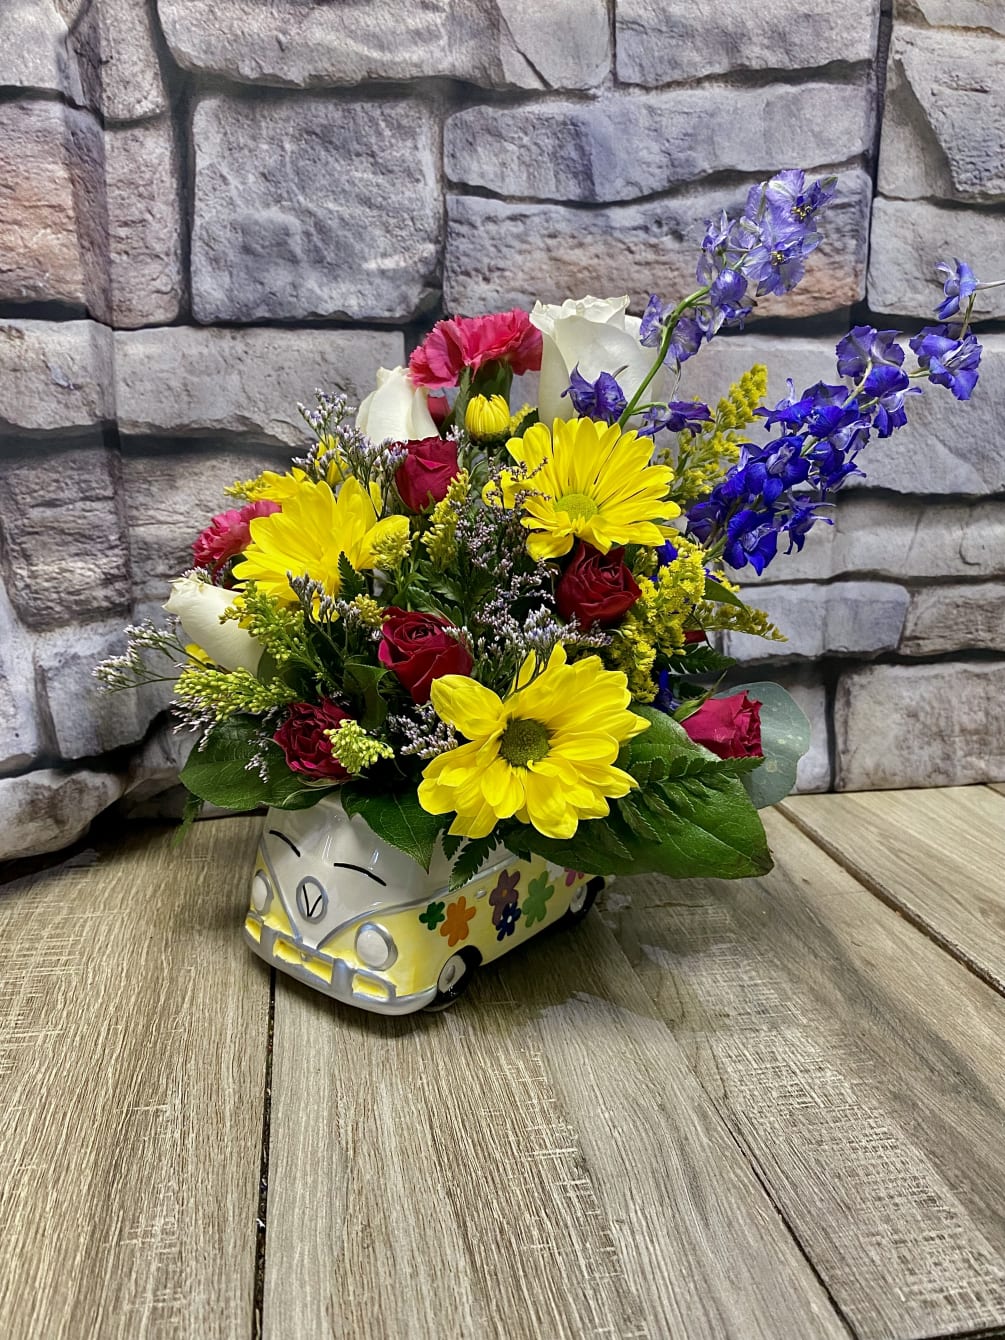 This bright, cheerful, hearty arrangement will bring out the hippy in everyone.